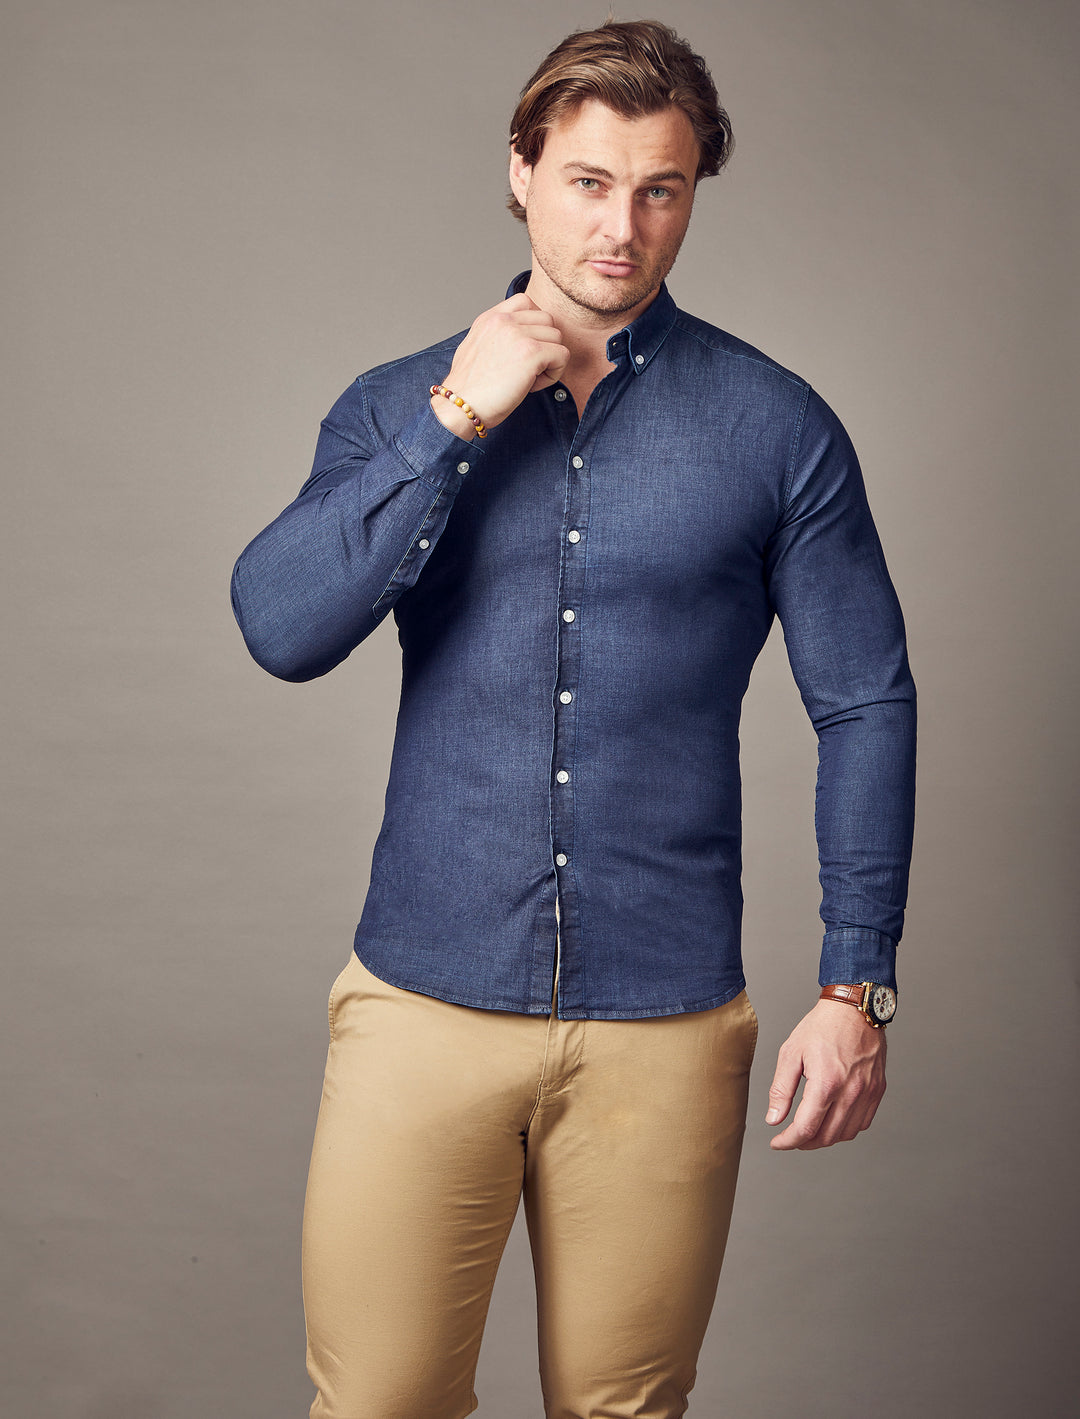 Tapered fit navy blue denim shirt, designed with a muscle fit, perfect for those with a muscular physique.